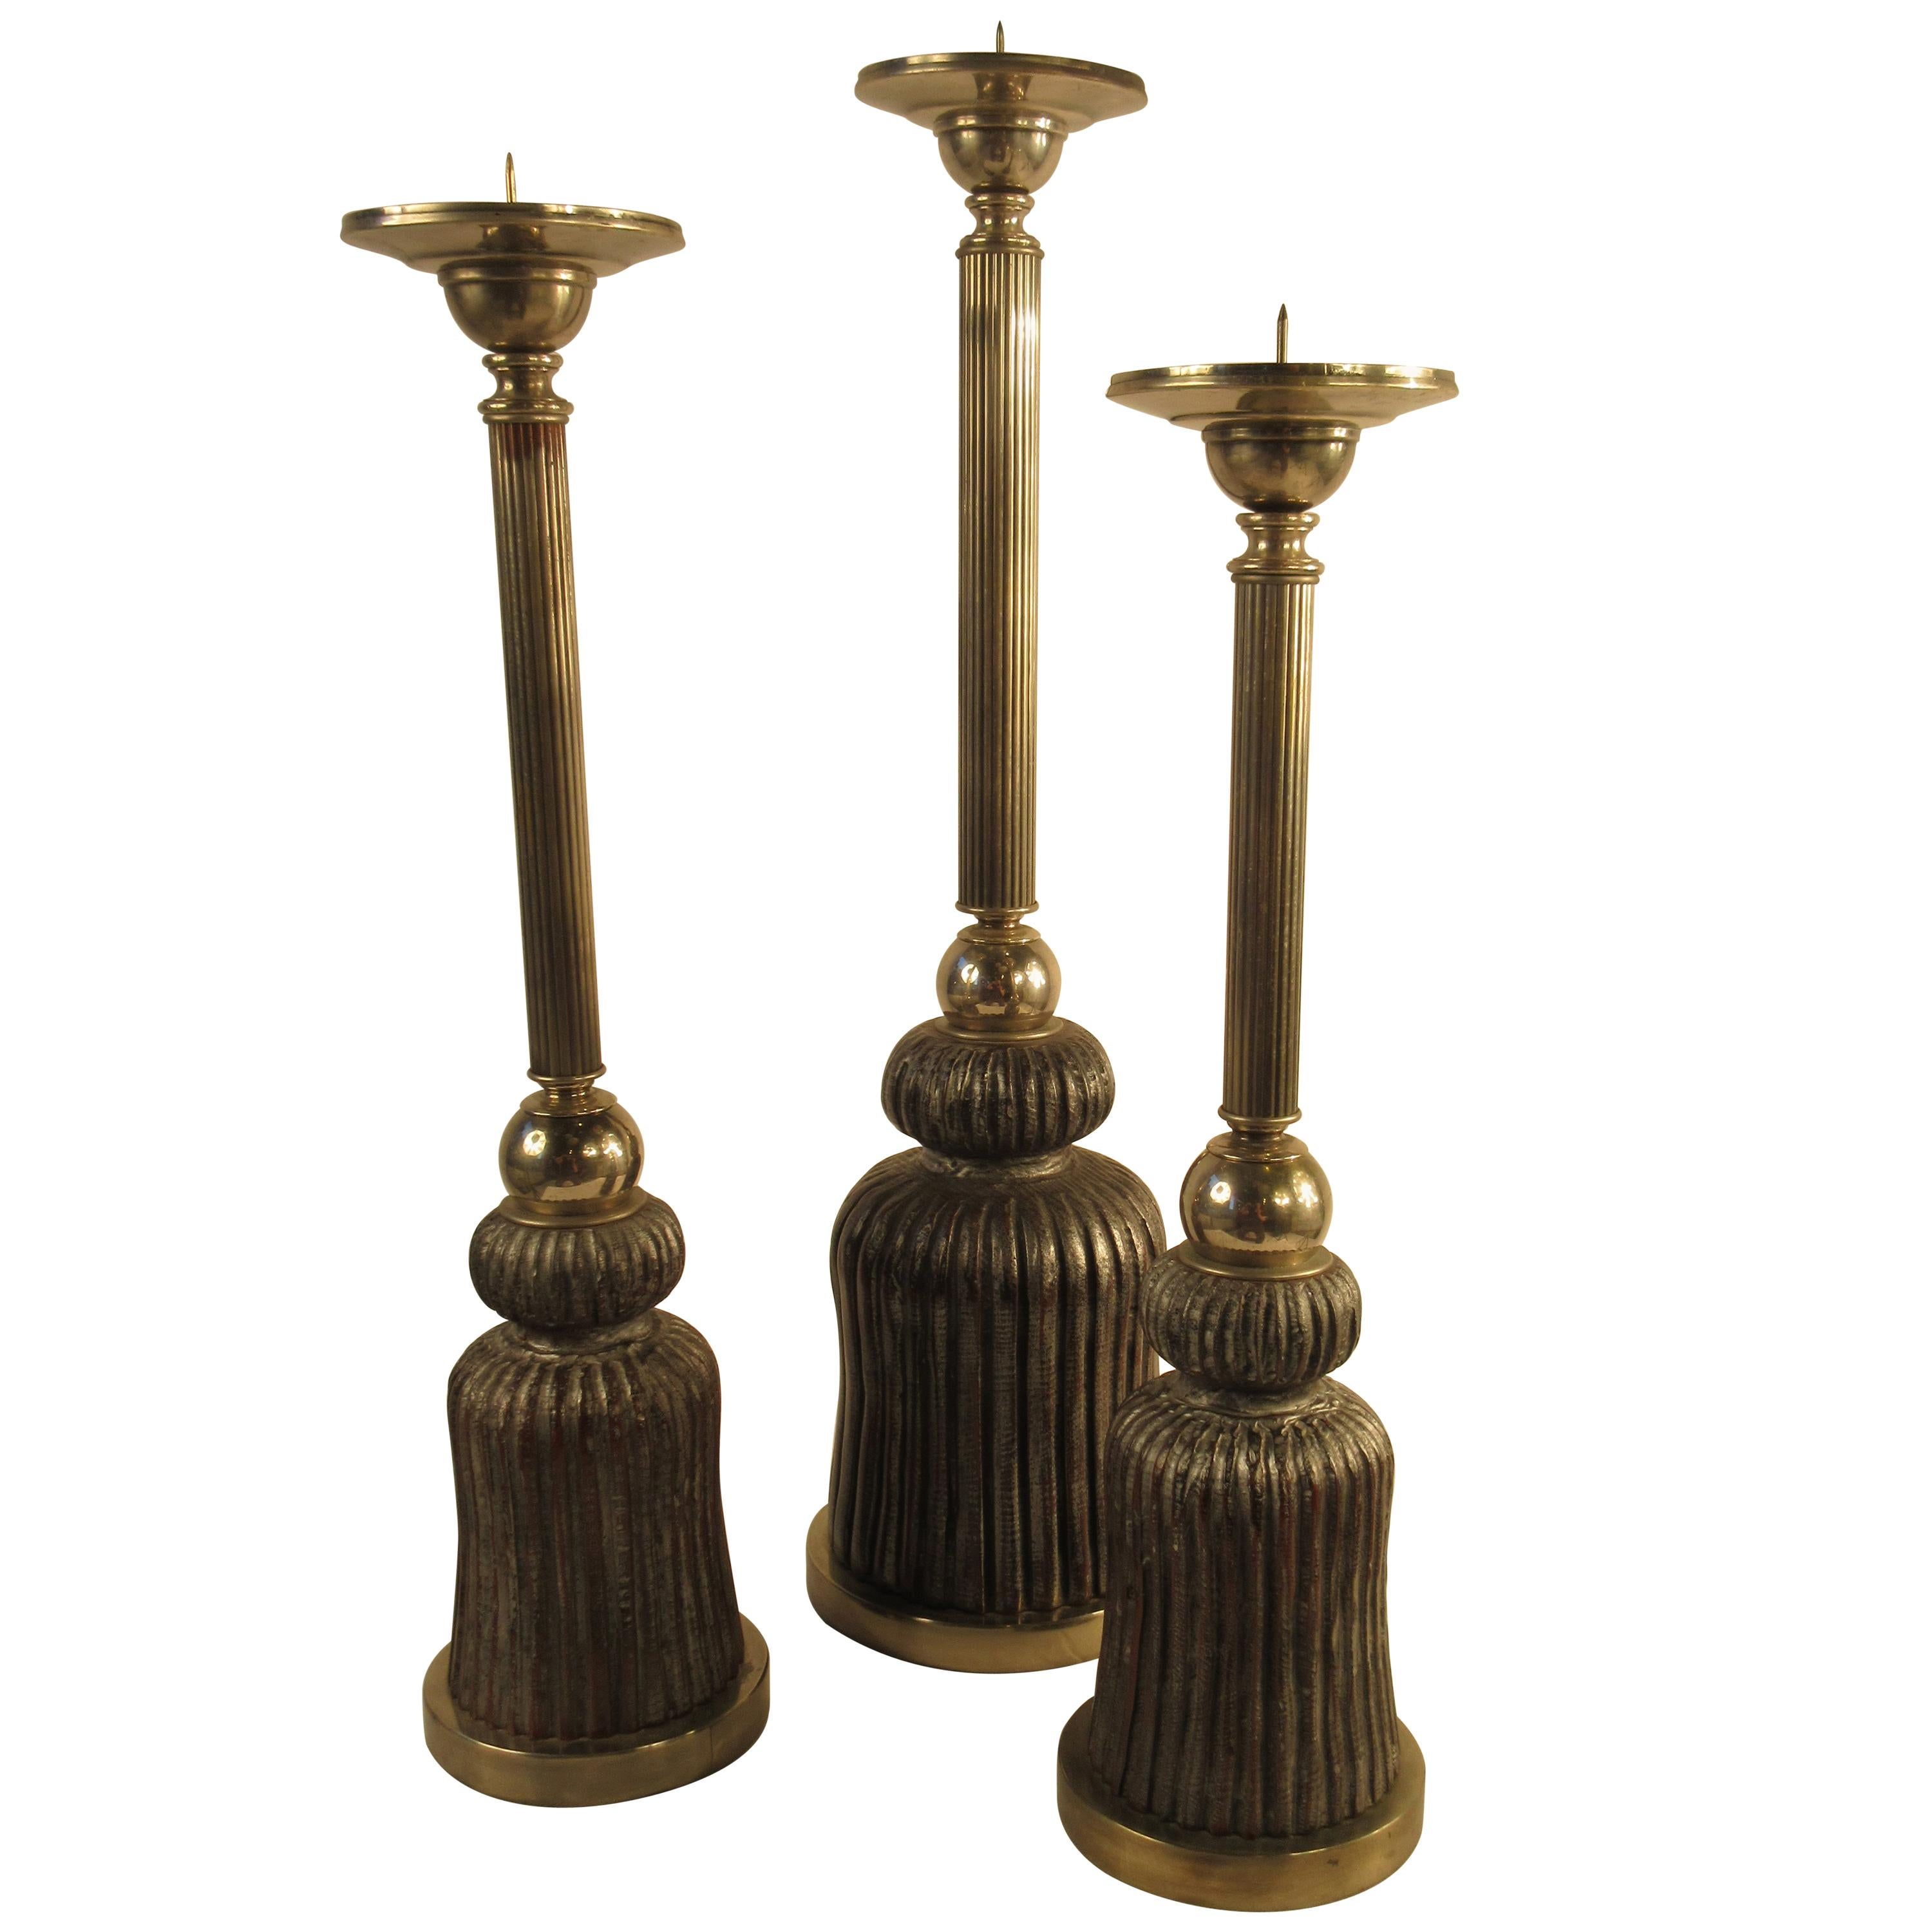 3 1980s Silver Plate and Wood Tassel Candlesticks